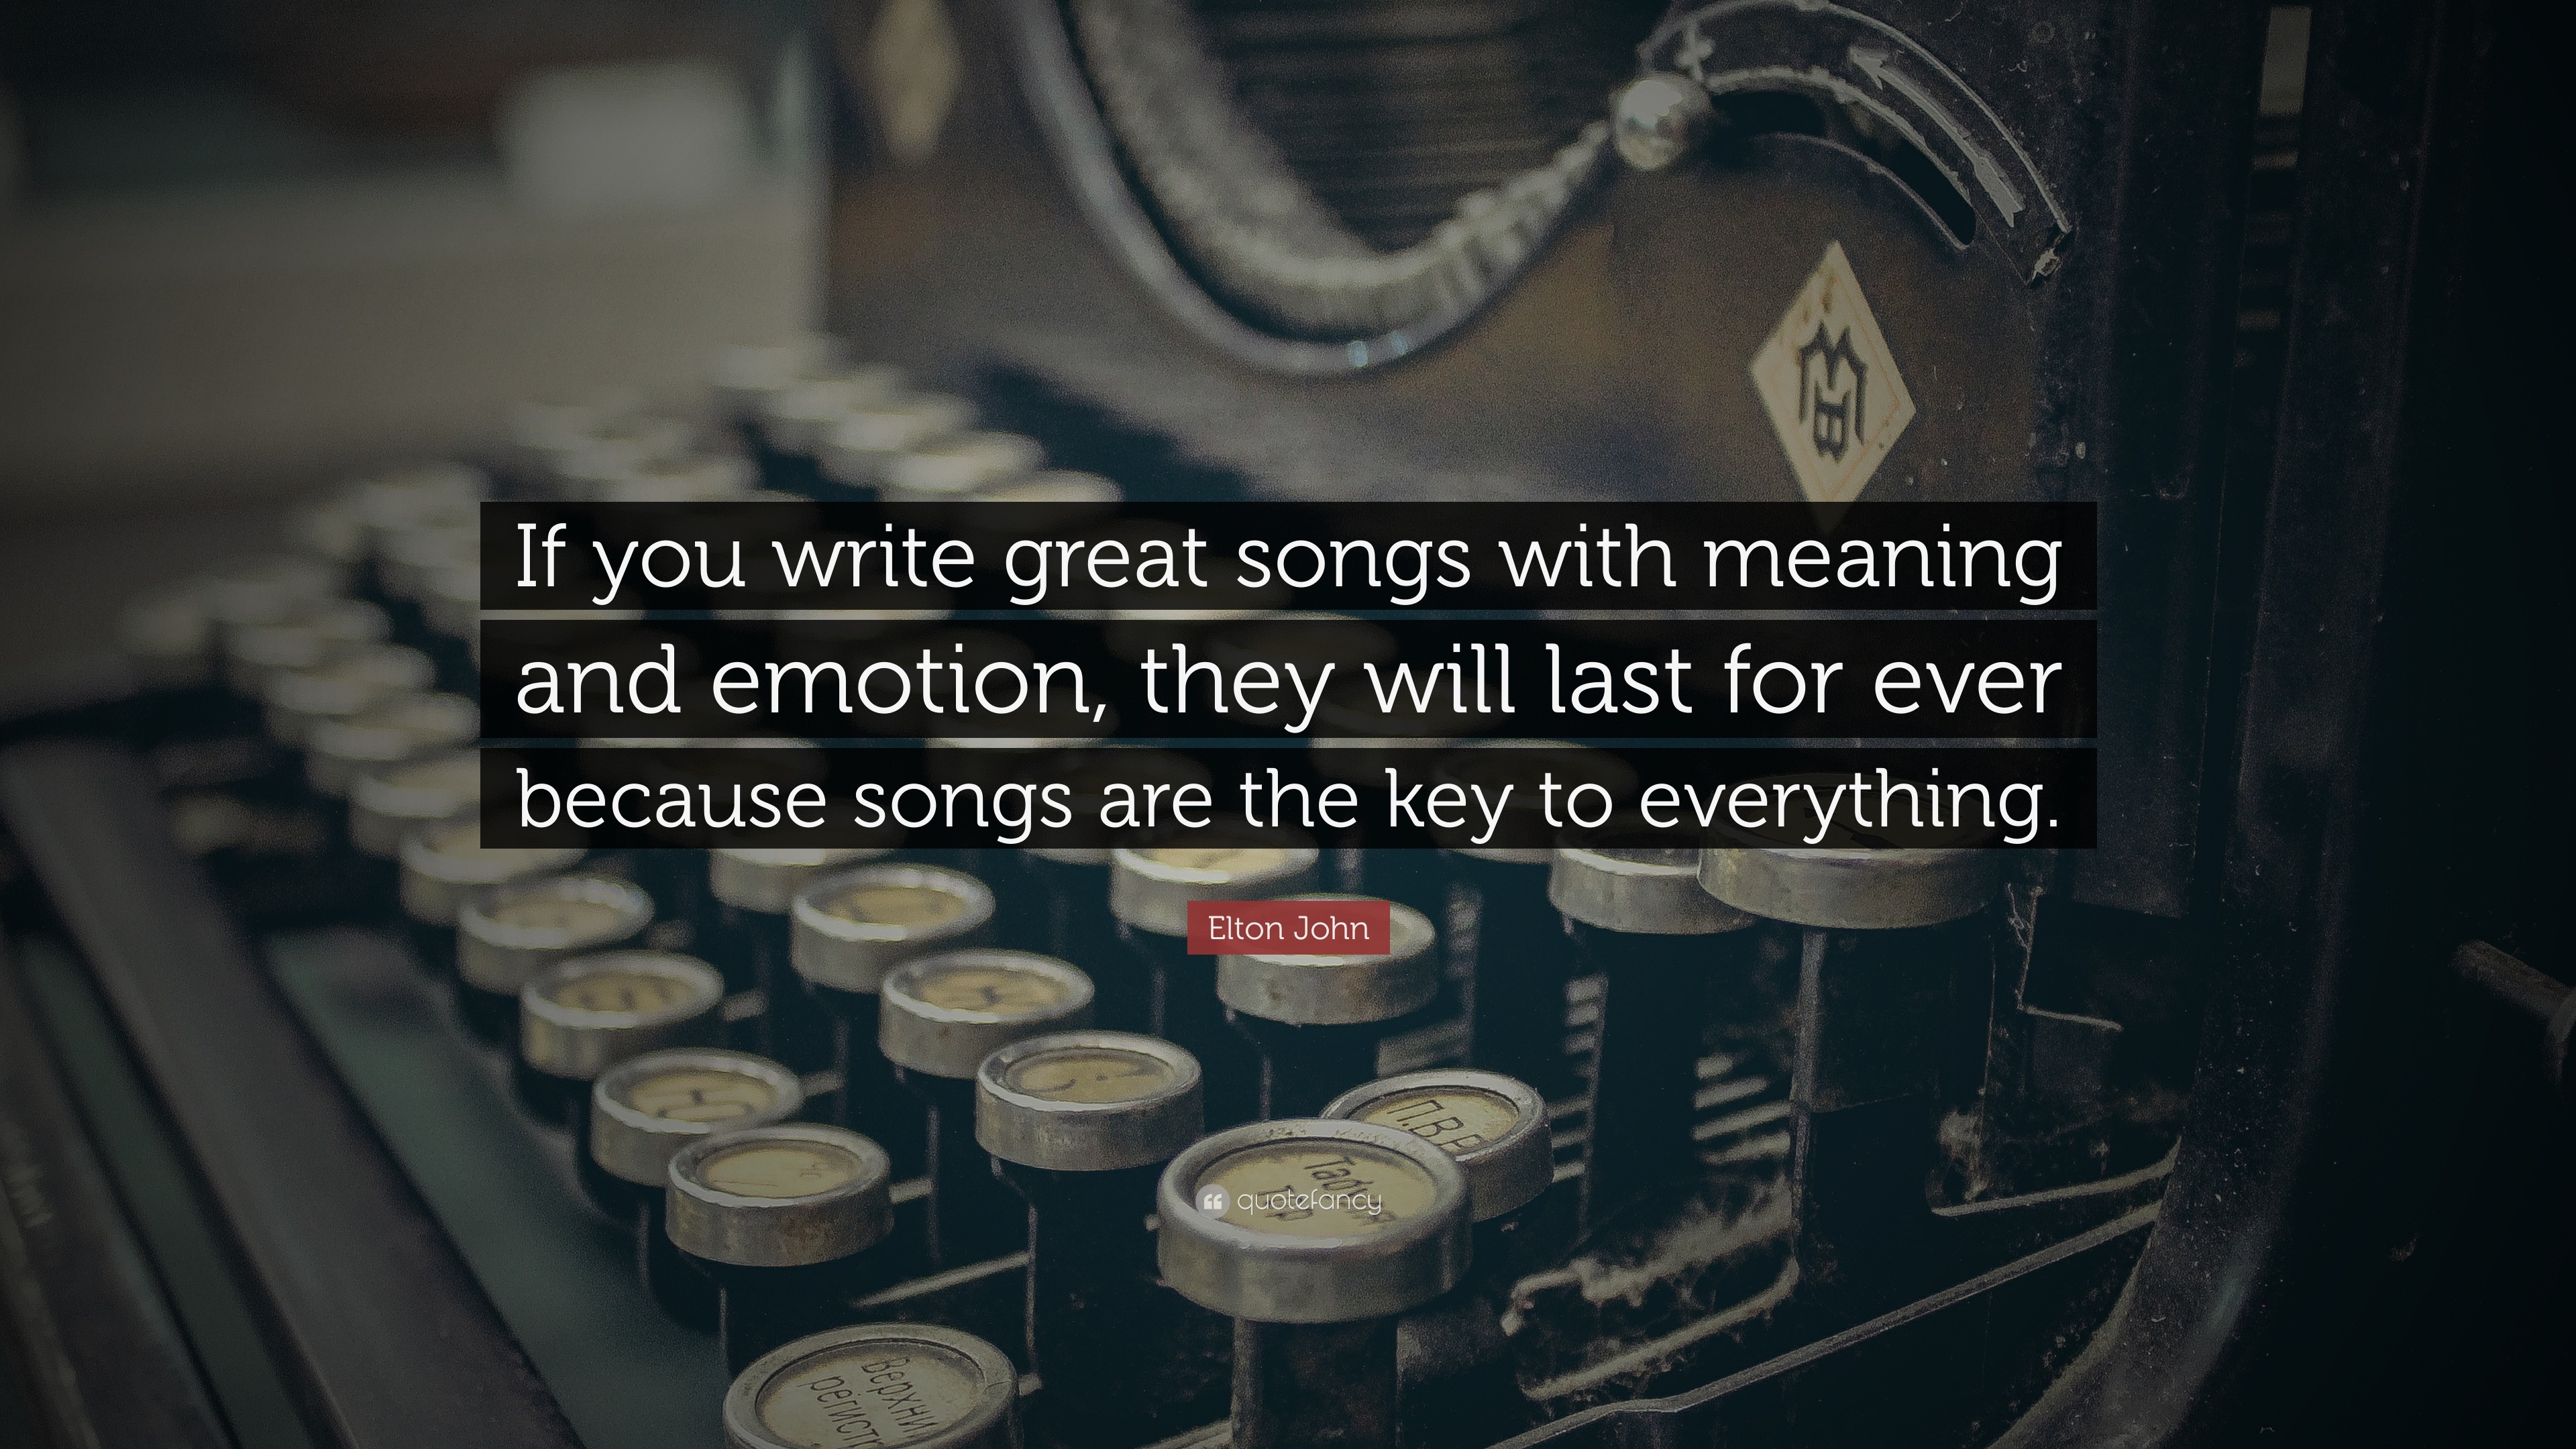 Elton John Quote “if You Write Great Songs With Meaning And Emotion They Will Last For Ever